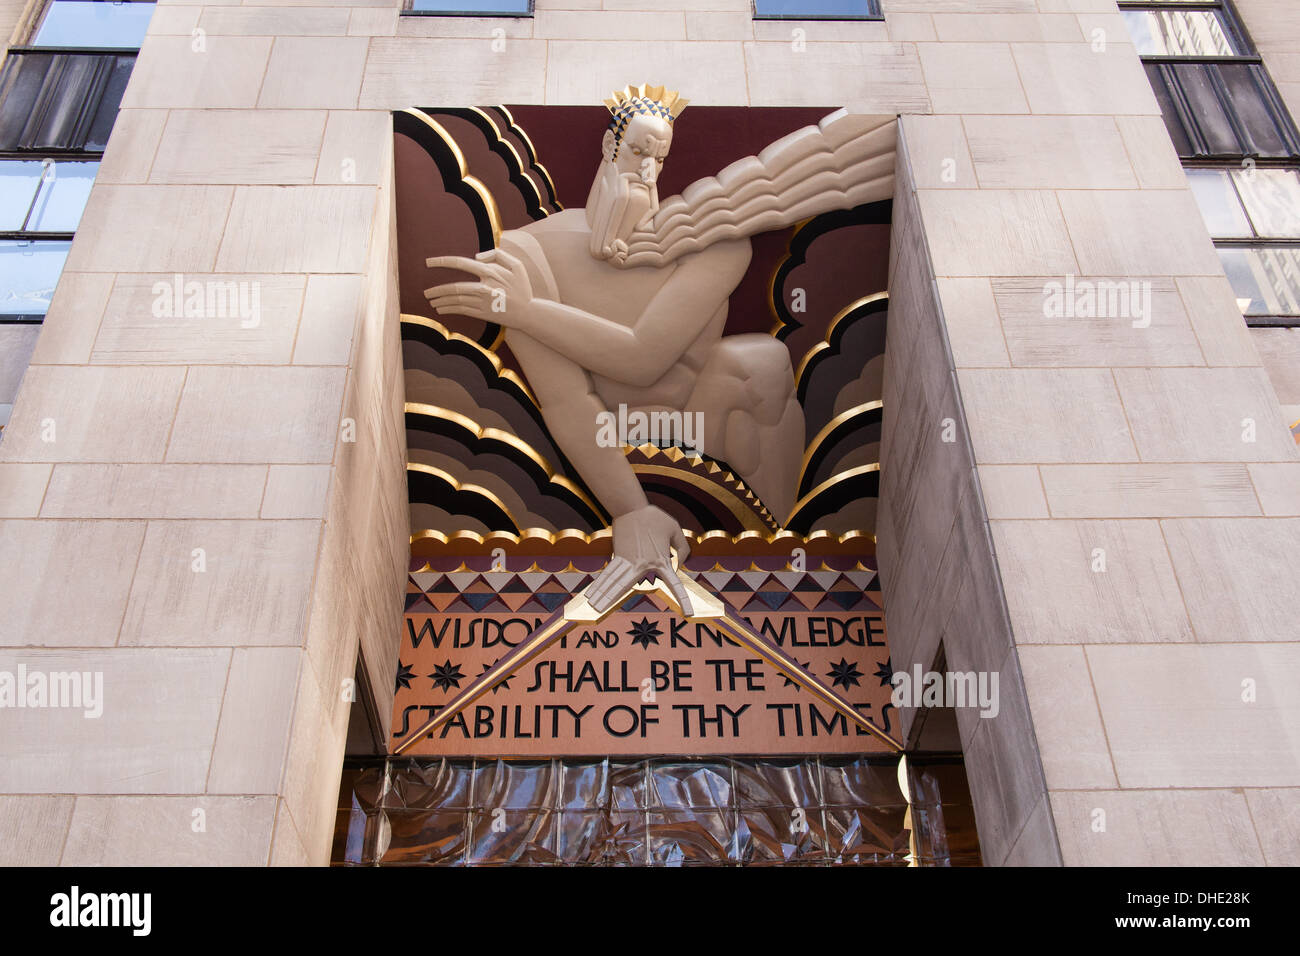 Statue of wisdom and knowledge, GE building, Rockefeller Center, Manhattan, New York City, United States of America. Stock Photo